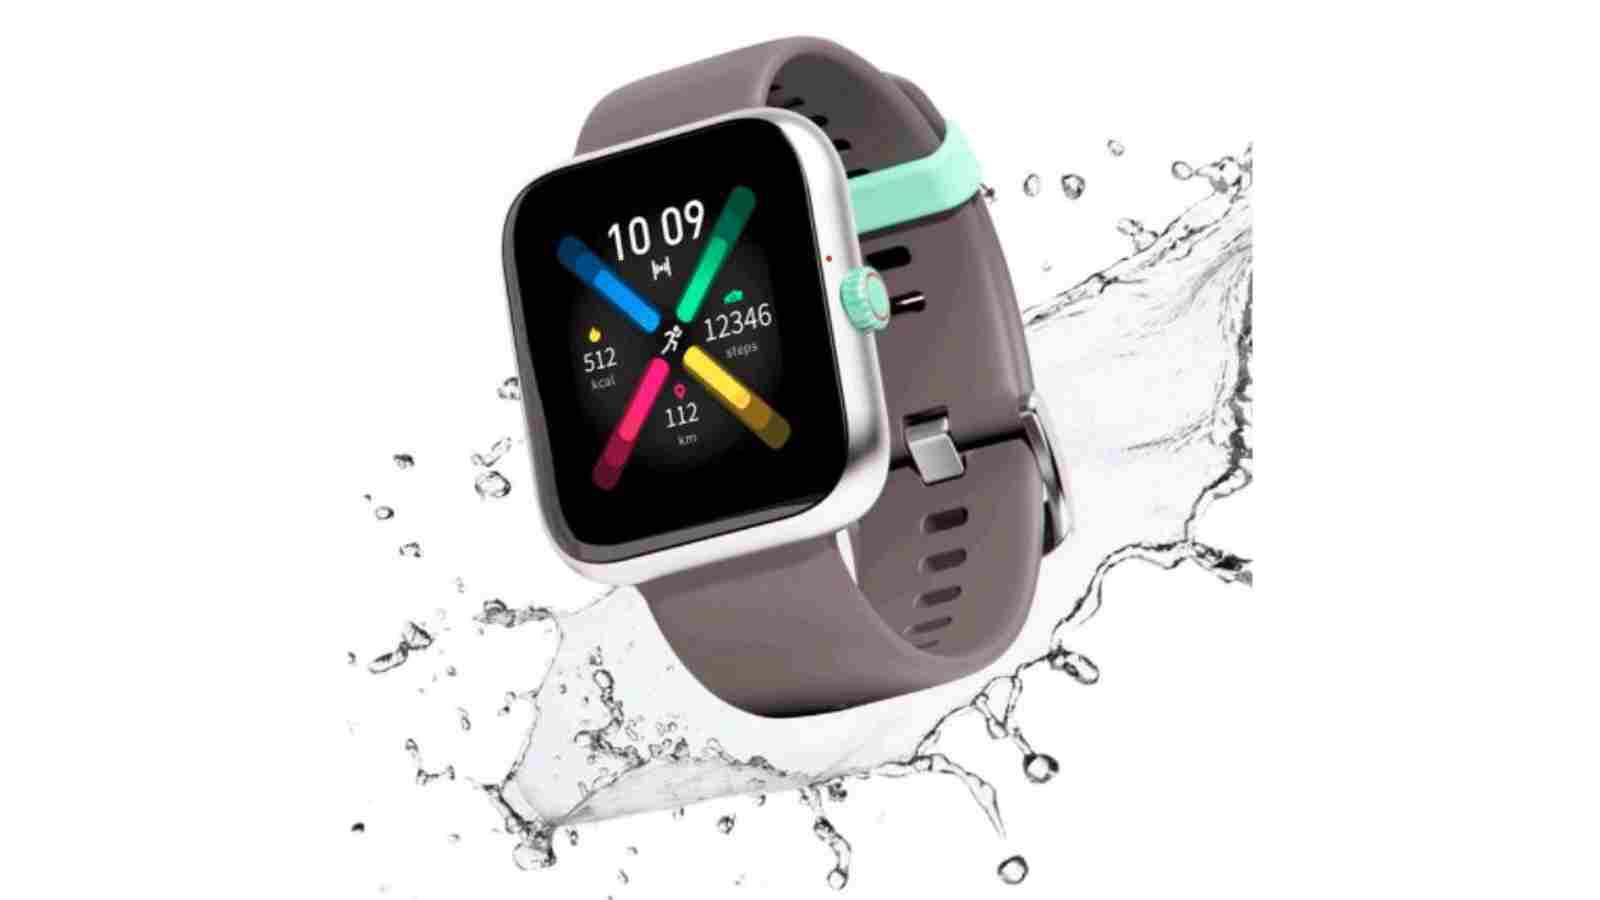 Boat Watch Mystiq with Spo2 sensor, High-Intensity Interval Training launched in India: Price, Specifications